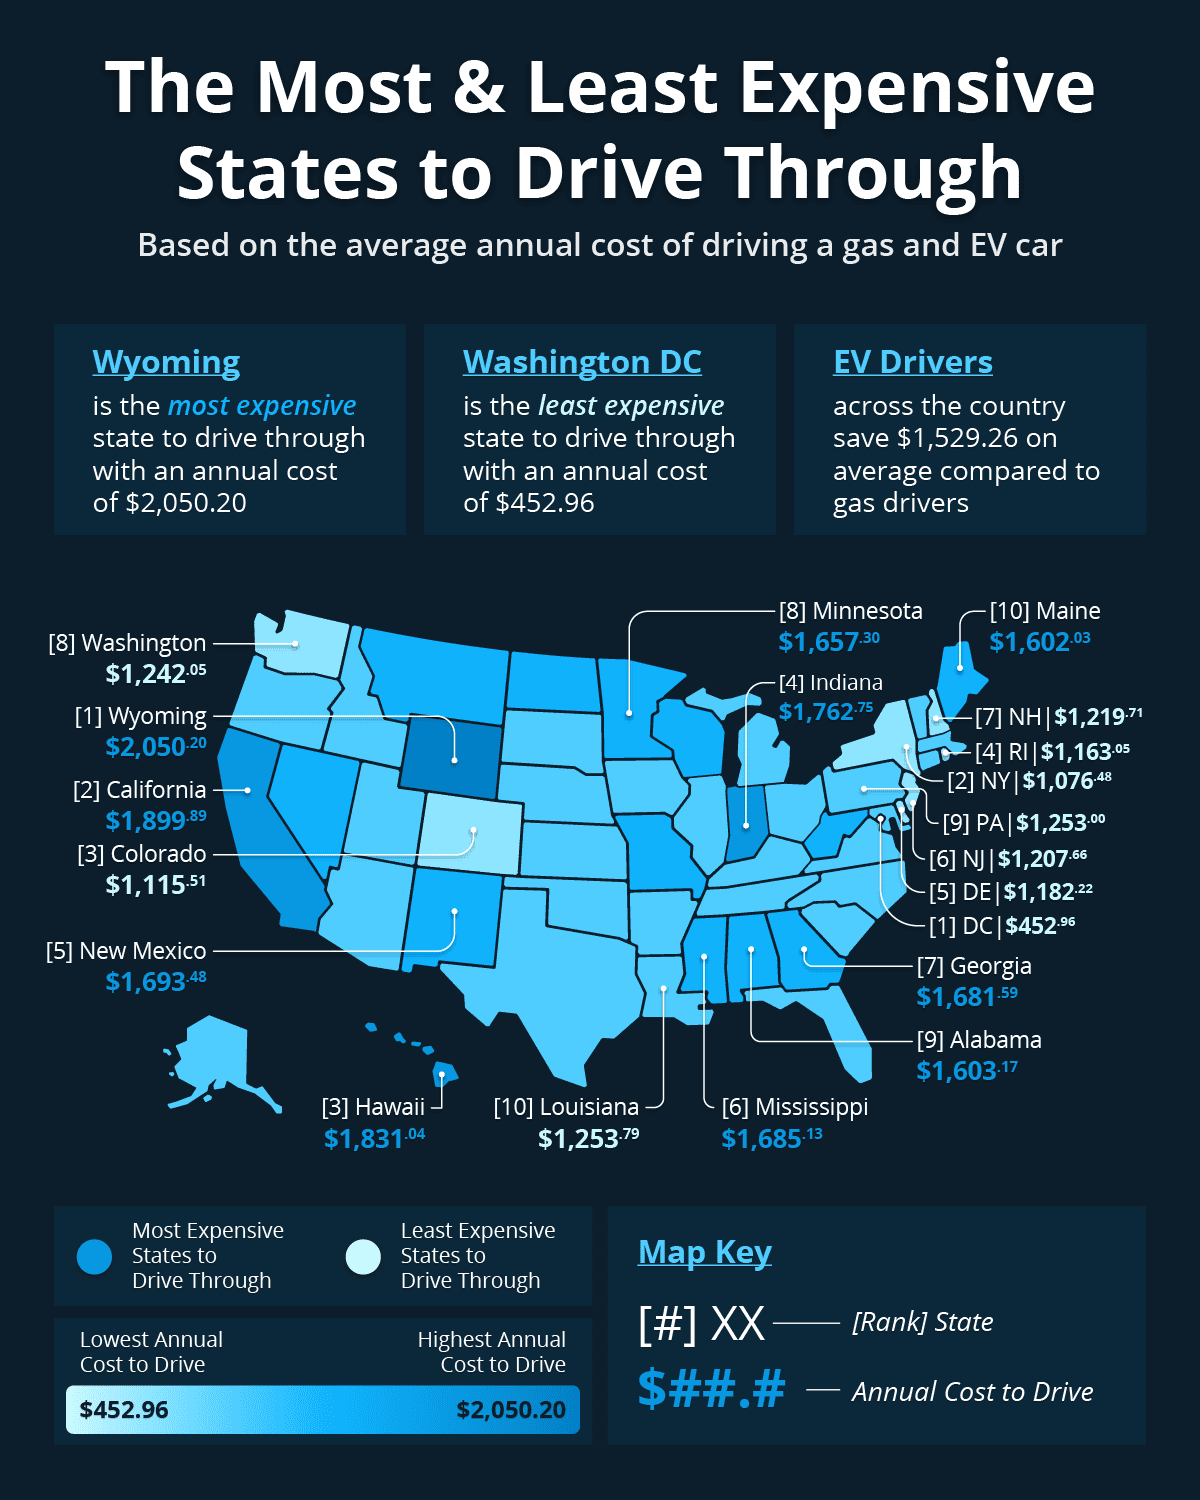 A U.S. map of the costliest statutes to drive through.